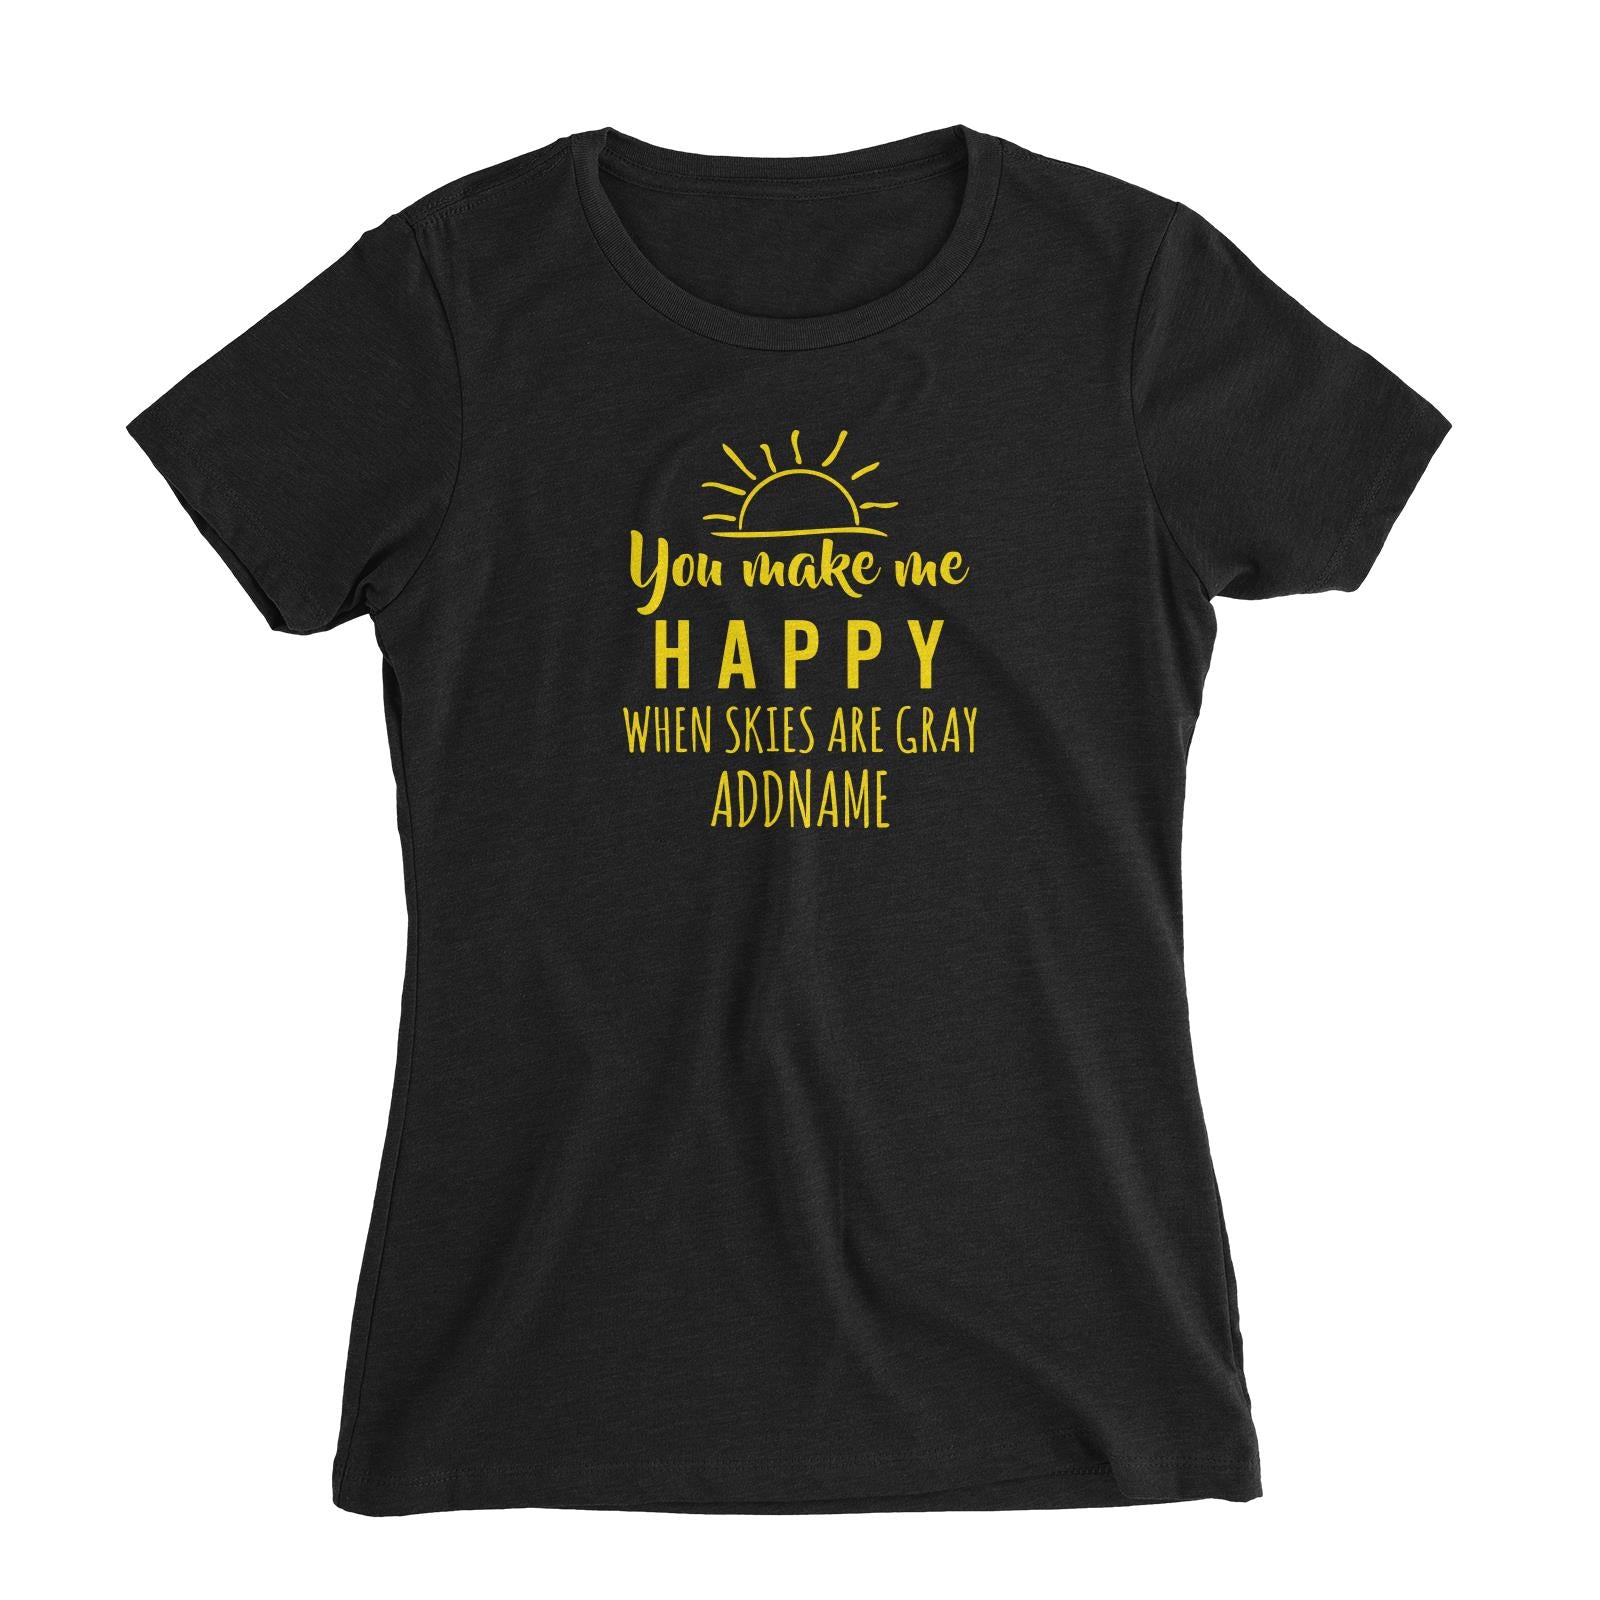 You make me happy when skies are gray Women's Slim Fit T-Shirt